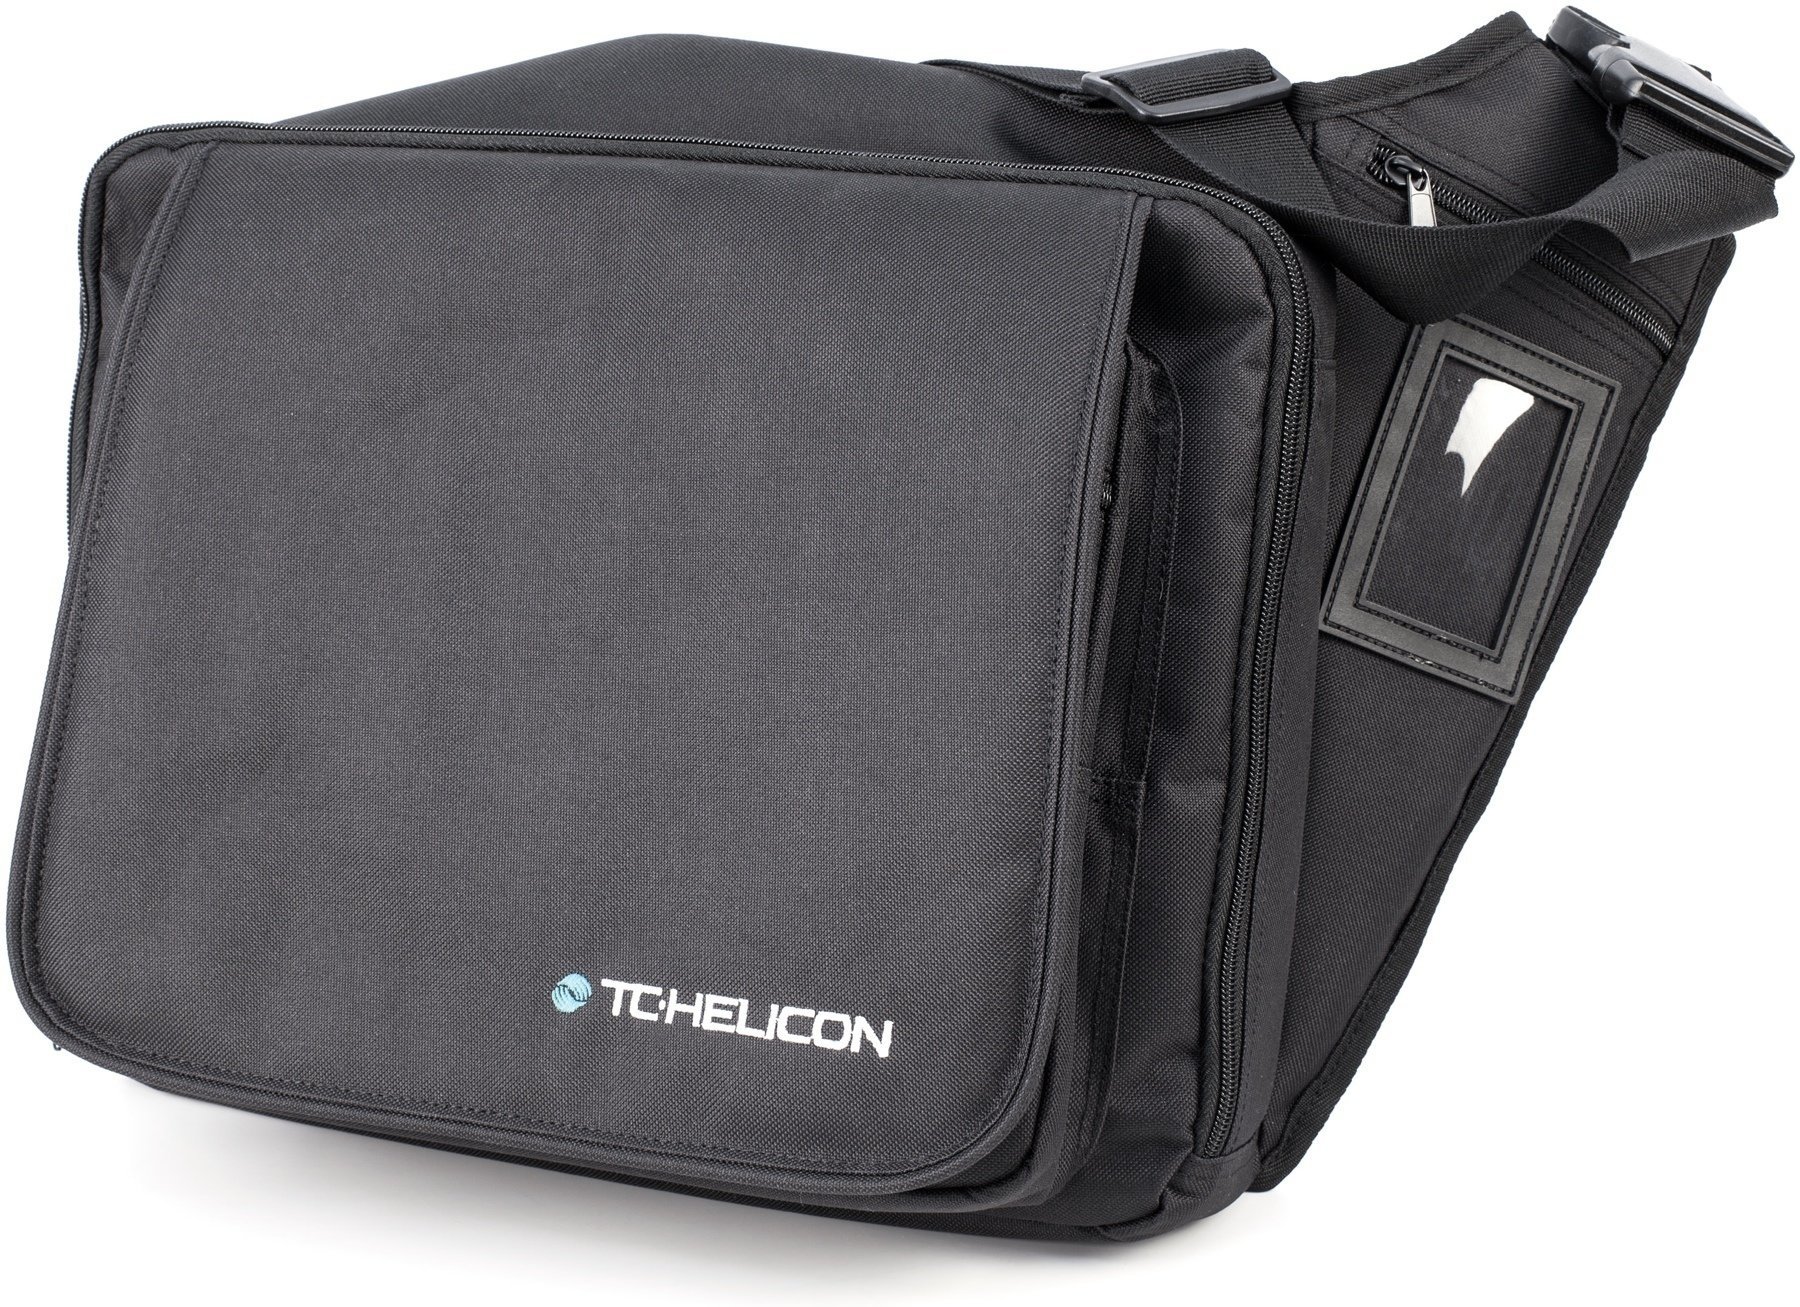 TC Helicon Gig Bag VoiceLive 3